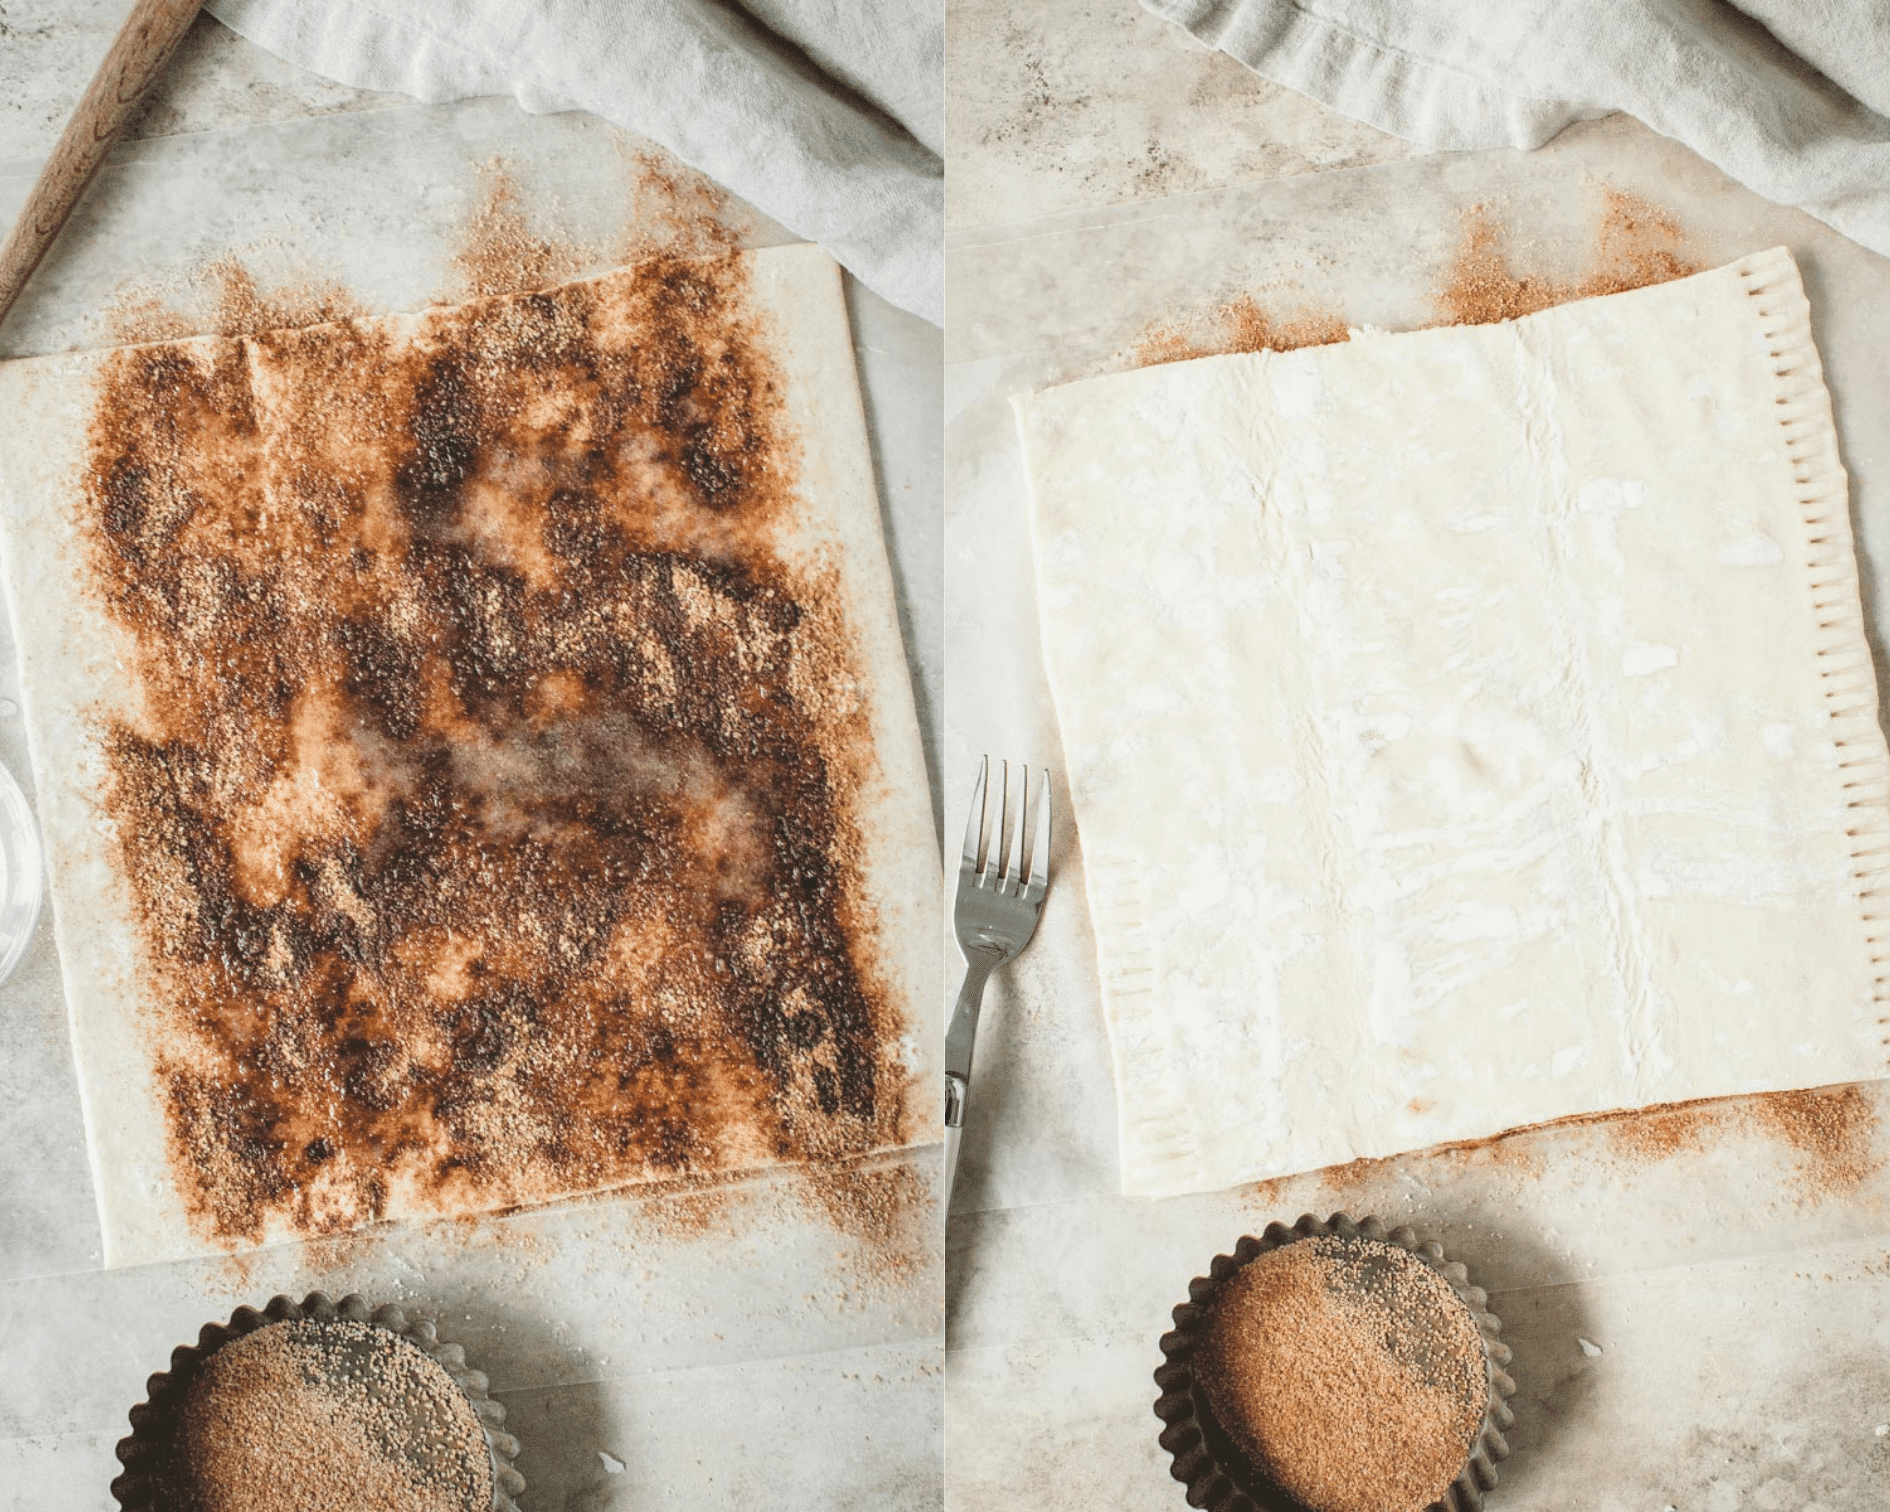 Water brushed on edges of pastry with cinnamon and sugar and butter on left and top layer of pastry on top of other pastry on right.